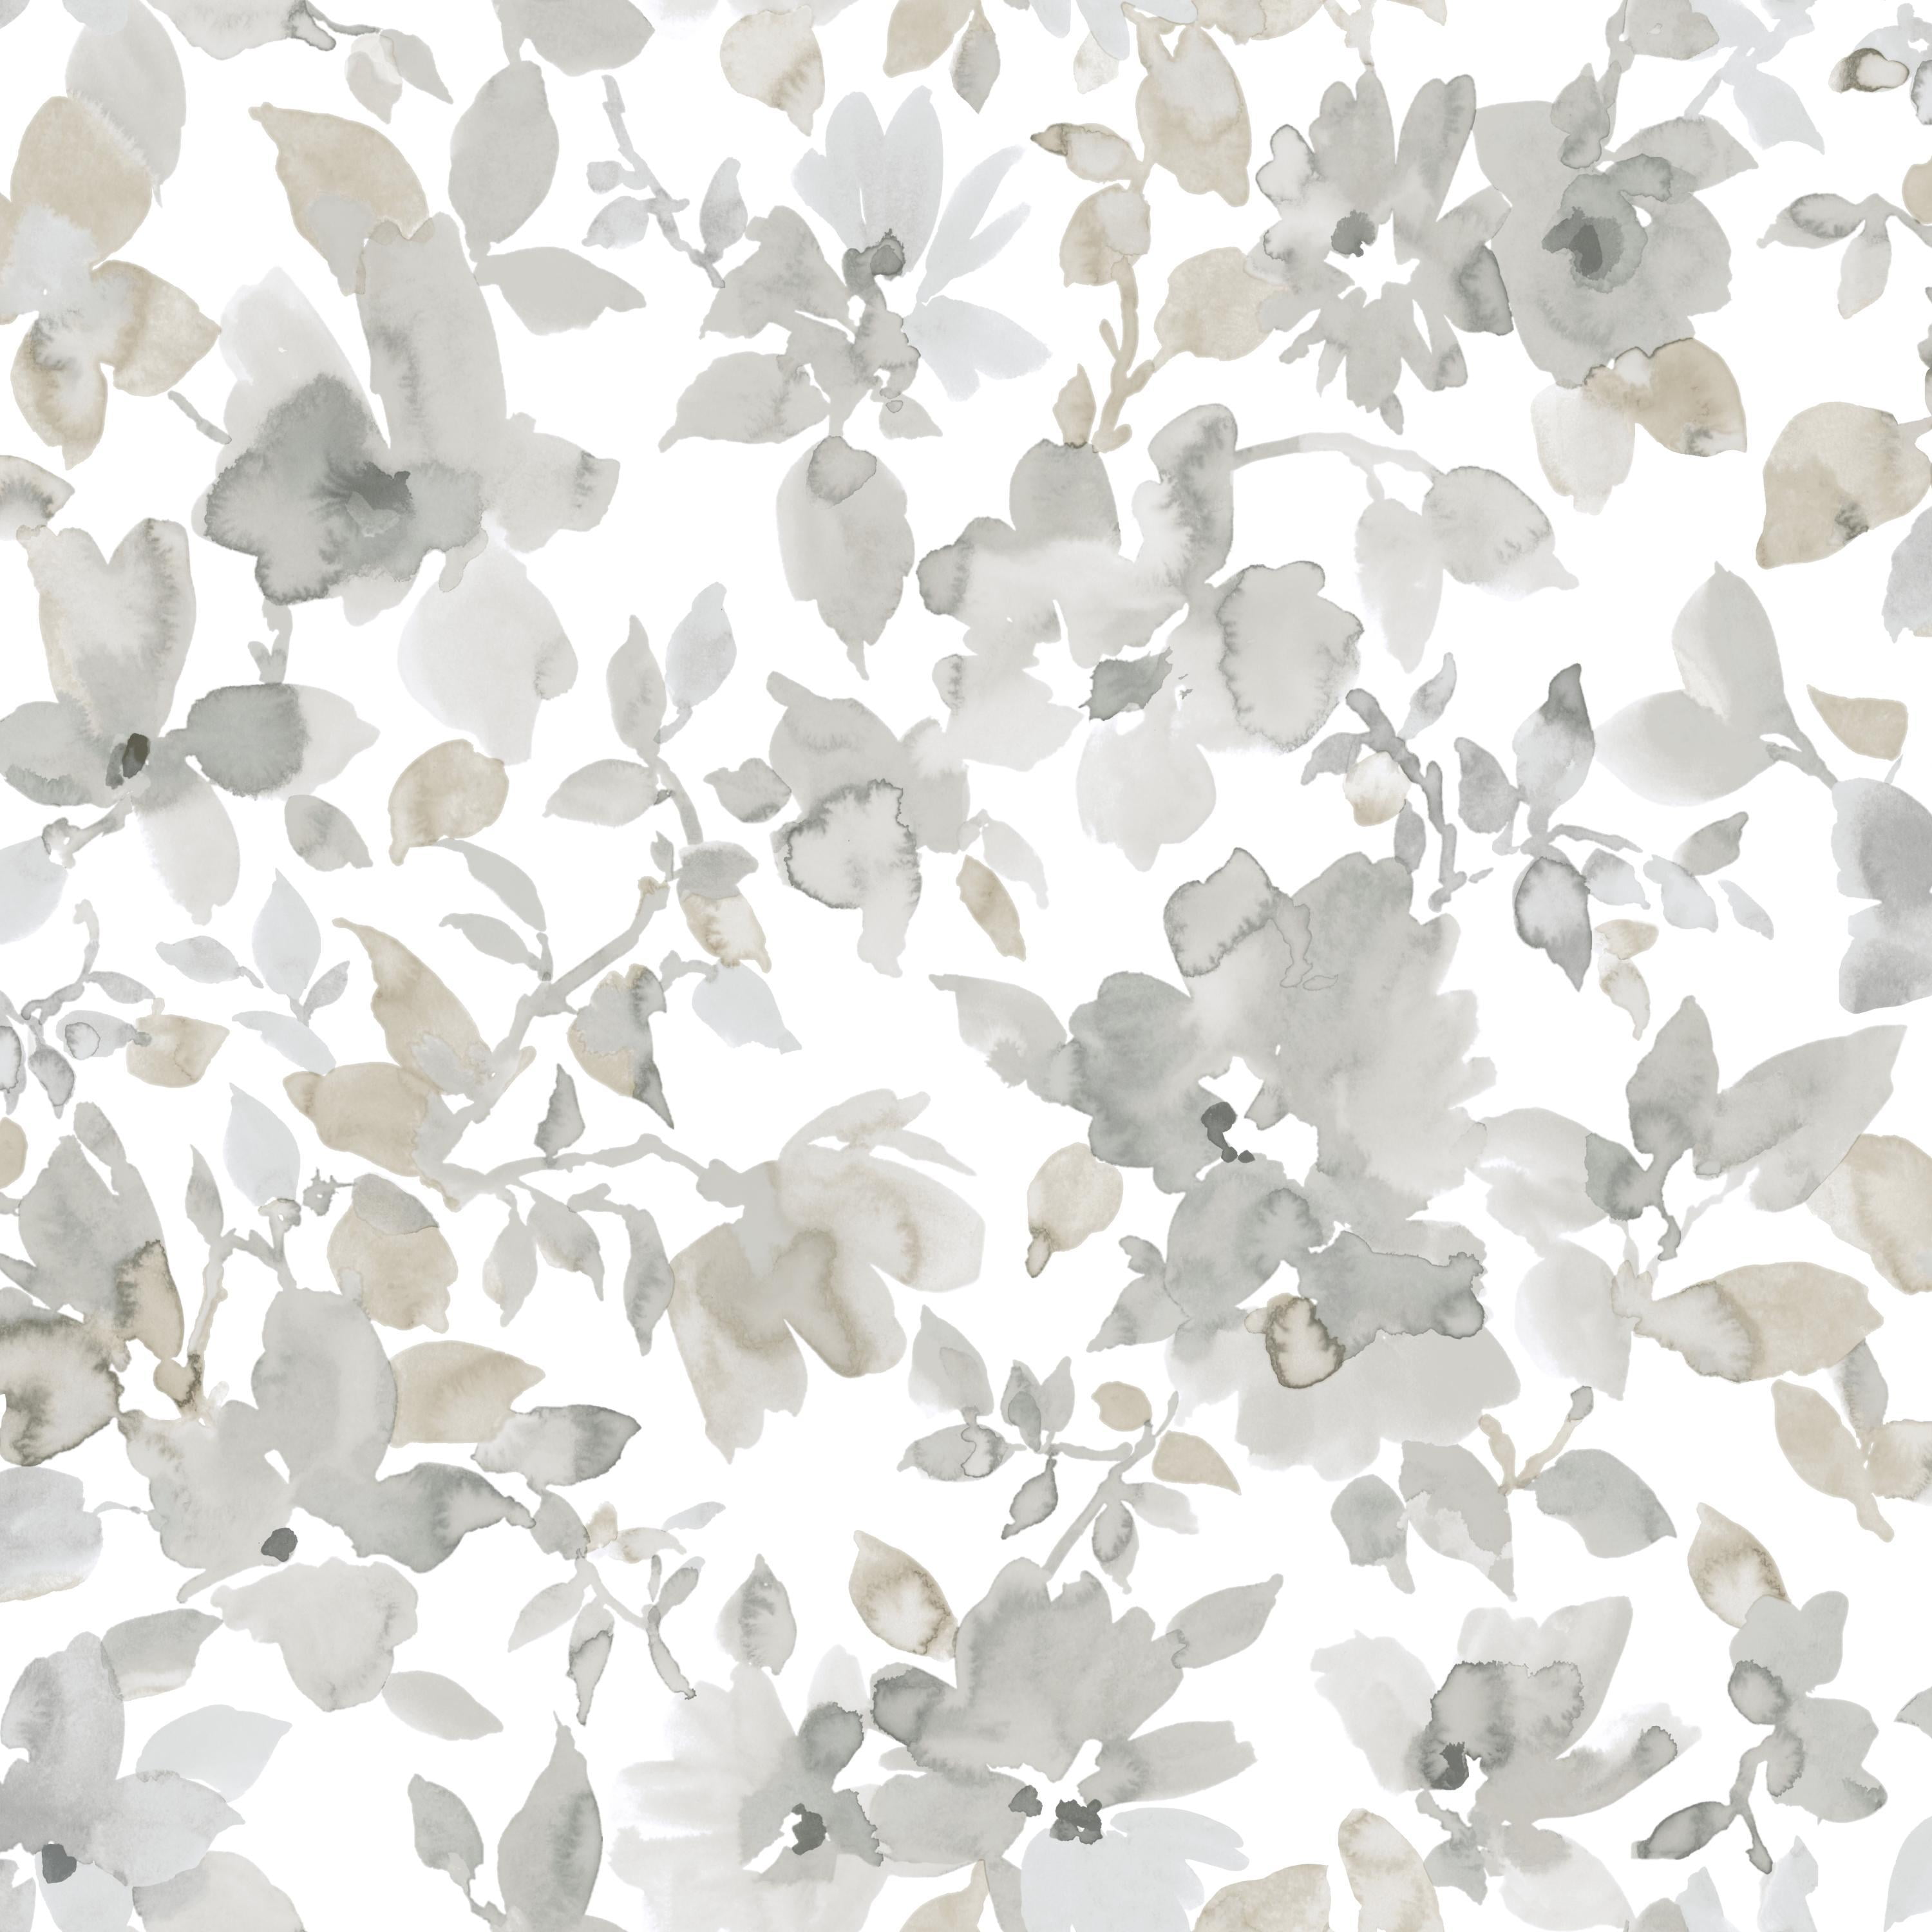 RoomMates Neutral Watercolor Floral Peel and Stick Wallpaper - Walmart